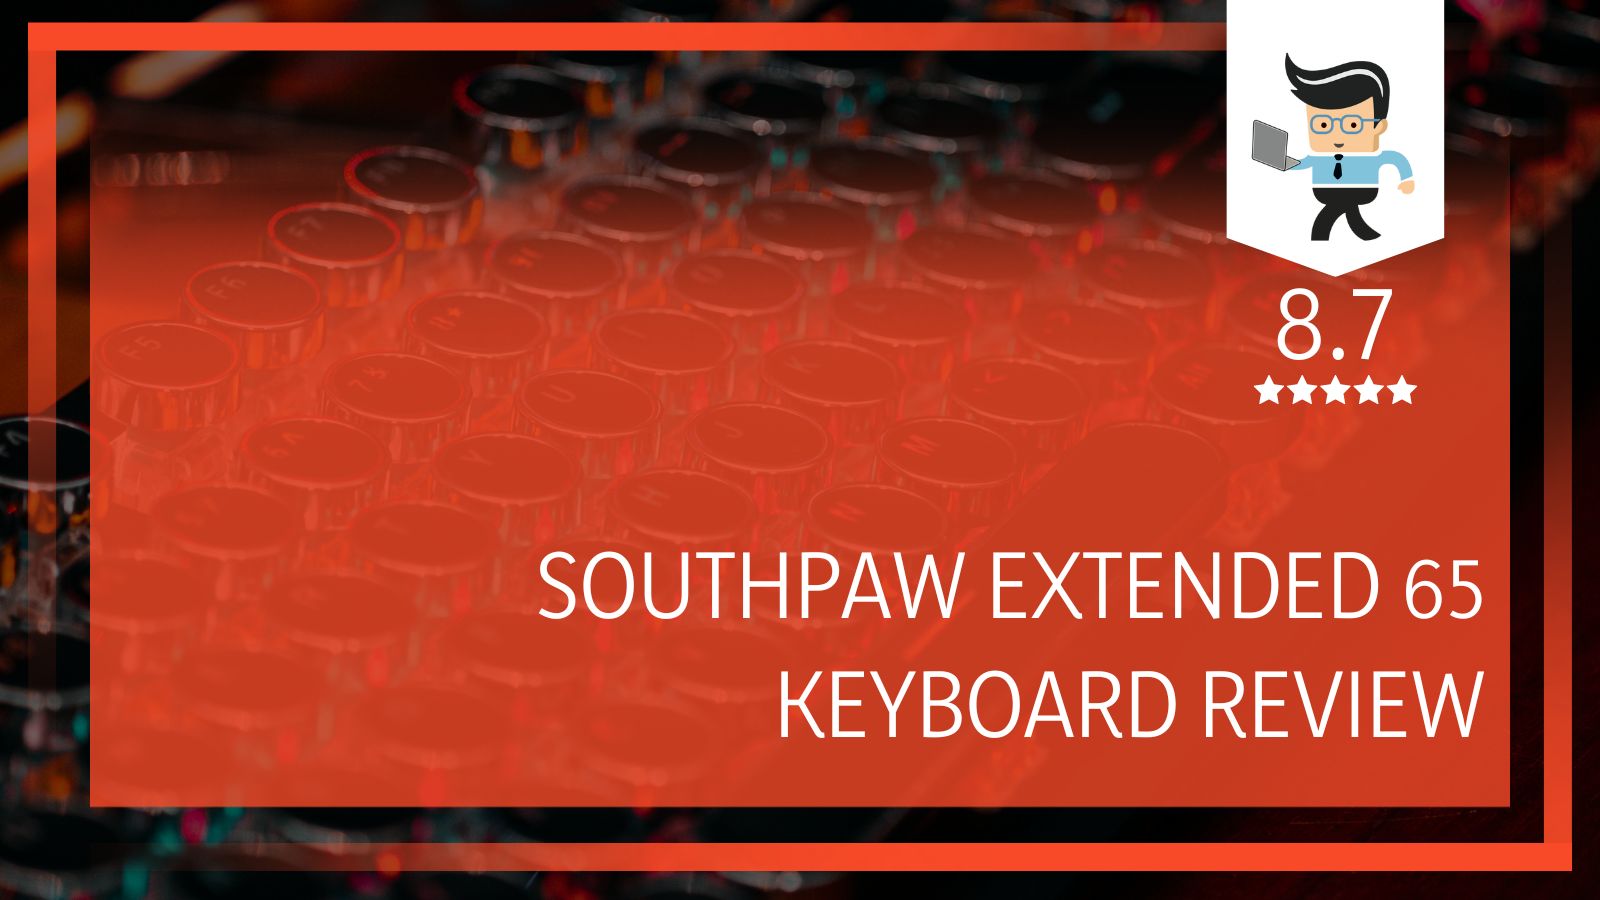 Southpaw Extended 65 Keyboard